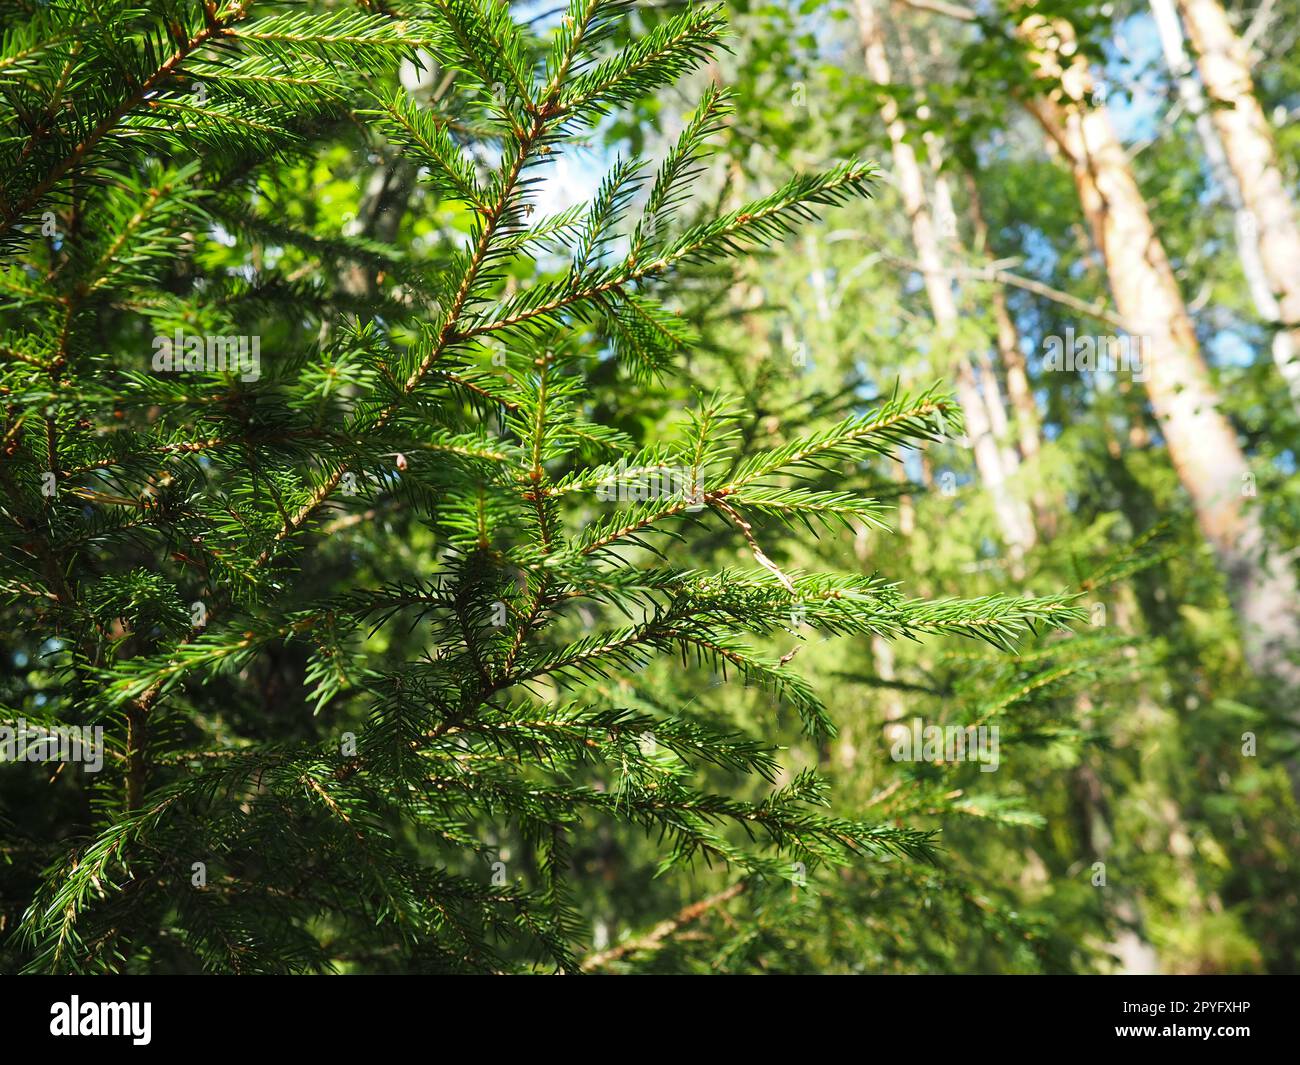 Picea spruce, a genus of coniferous evergreen trees in the pine family Pinaceae. Coniferous forest in Karelia. Spruce branches and needles. The problem of ecology, deforestation and climate change Stock Photo